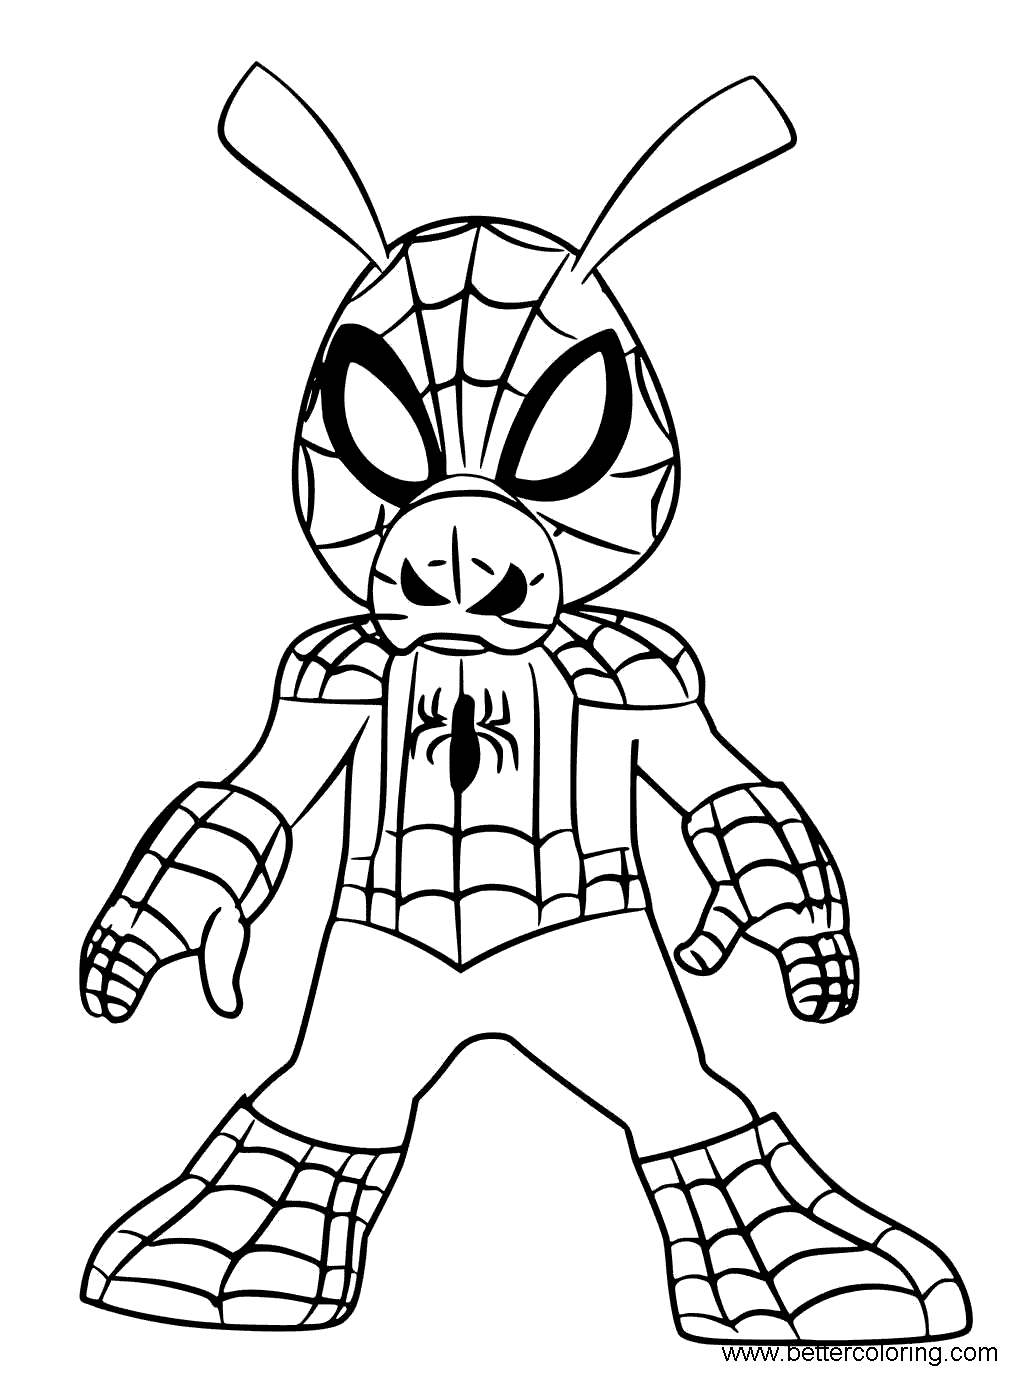 Miles Morales Spider Verse Coloring Sheets Coloring Pages